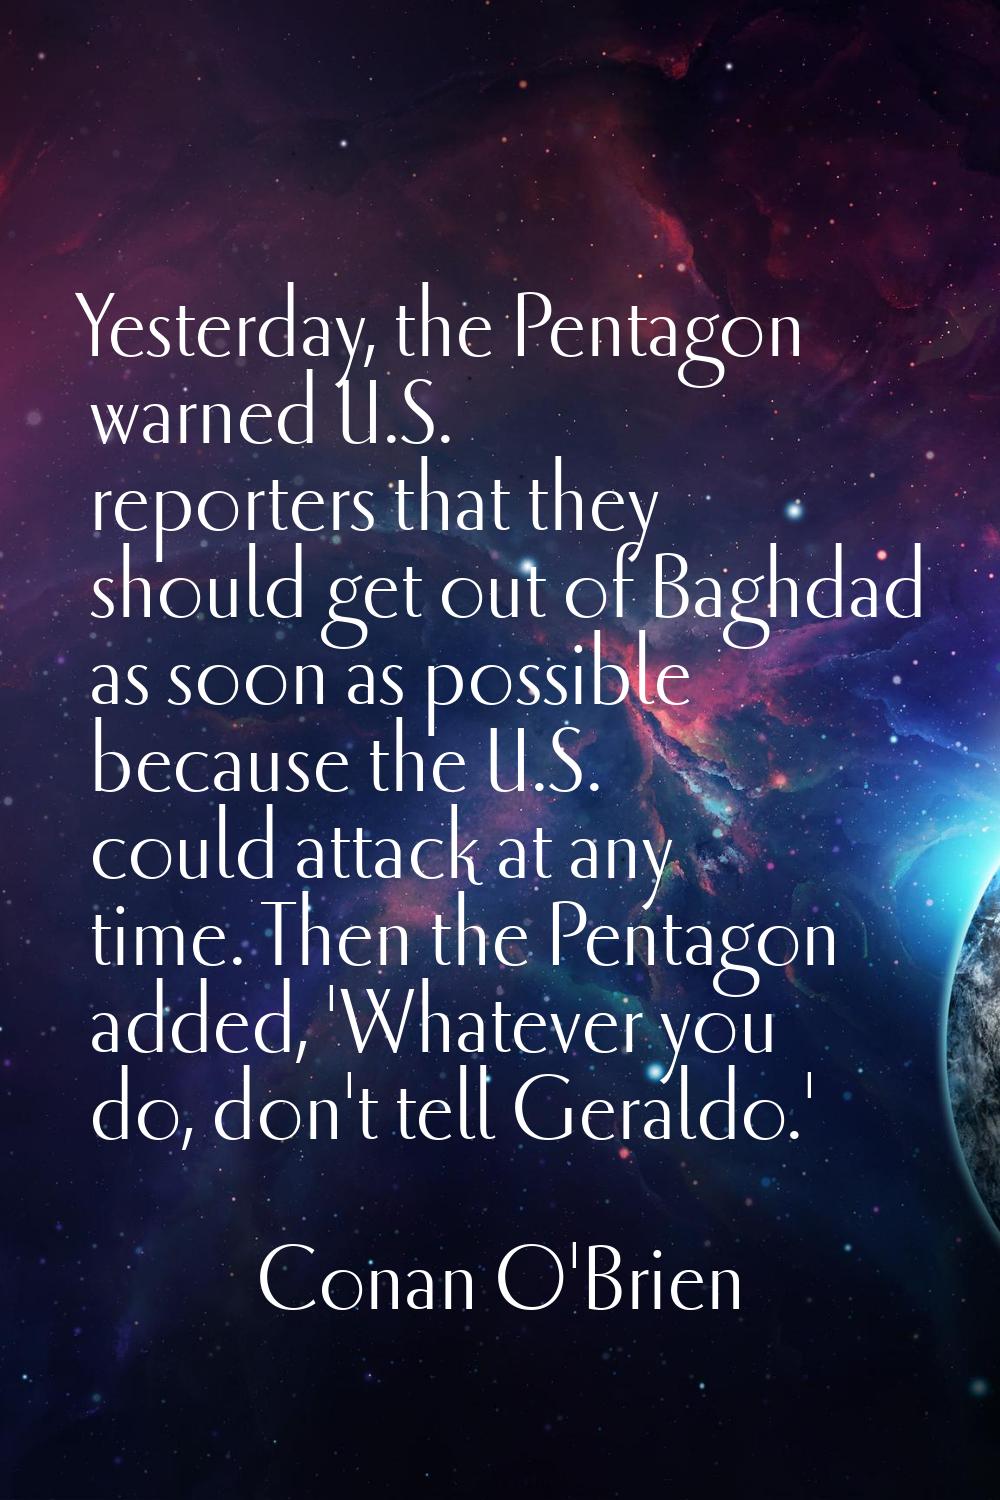 Yesterday, the Pentagon warned U.S. reporters that they should get out of Baghdad as soon as possib